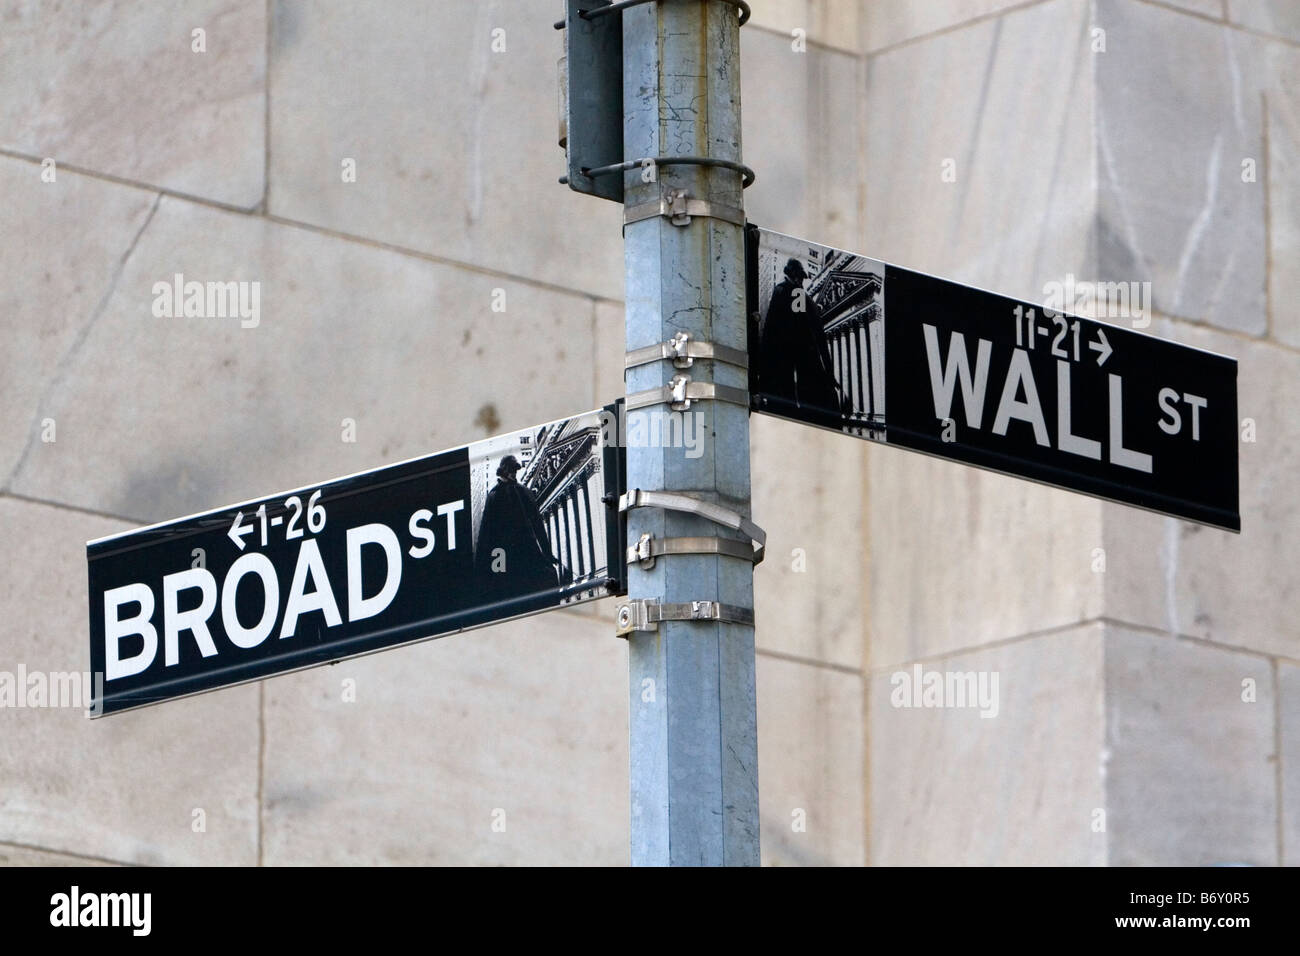 Street sign for Wall and Broad in New York City New York USA Stock Photo